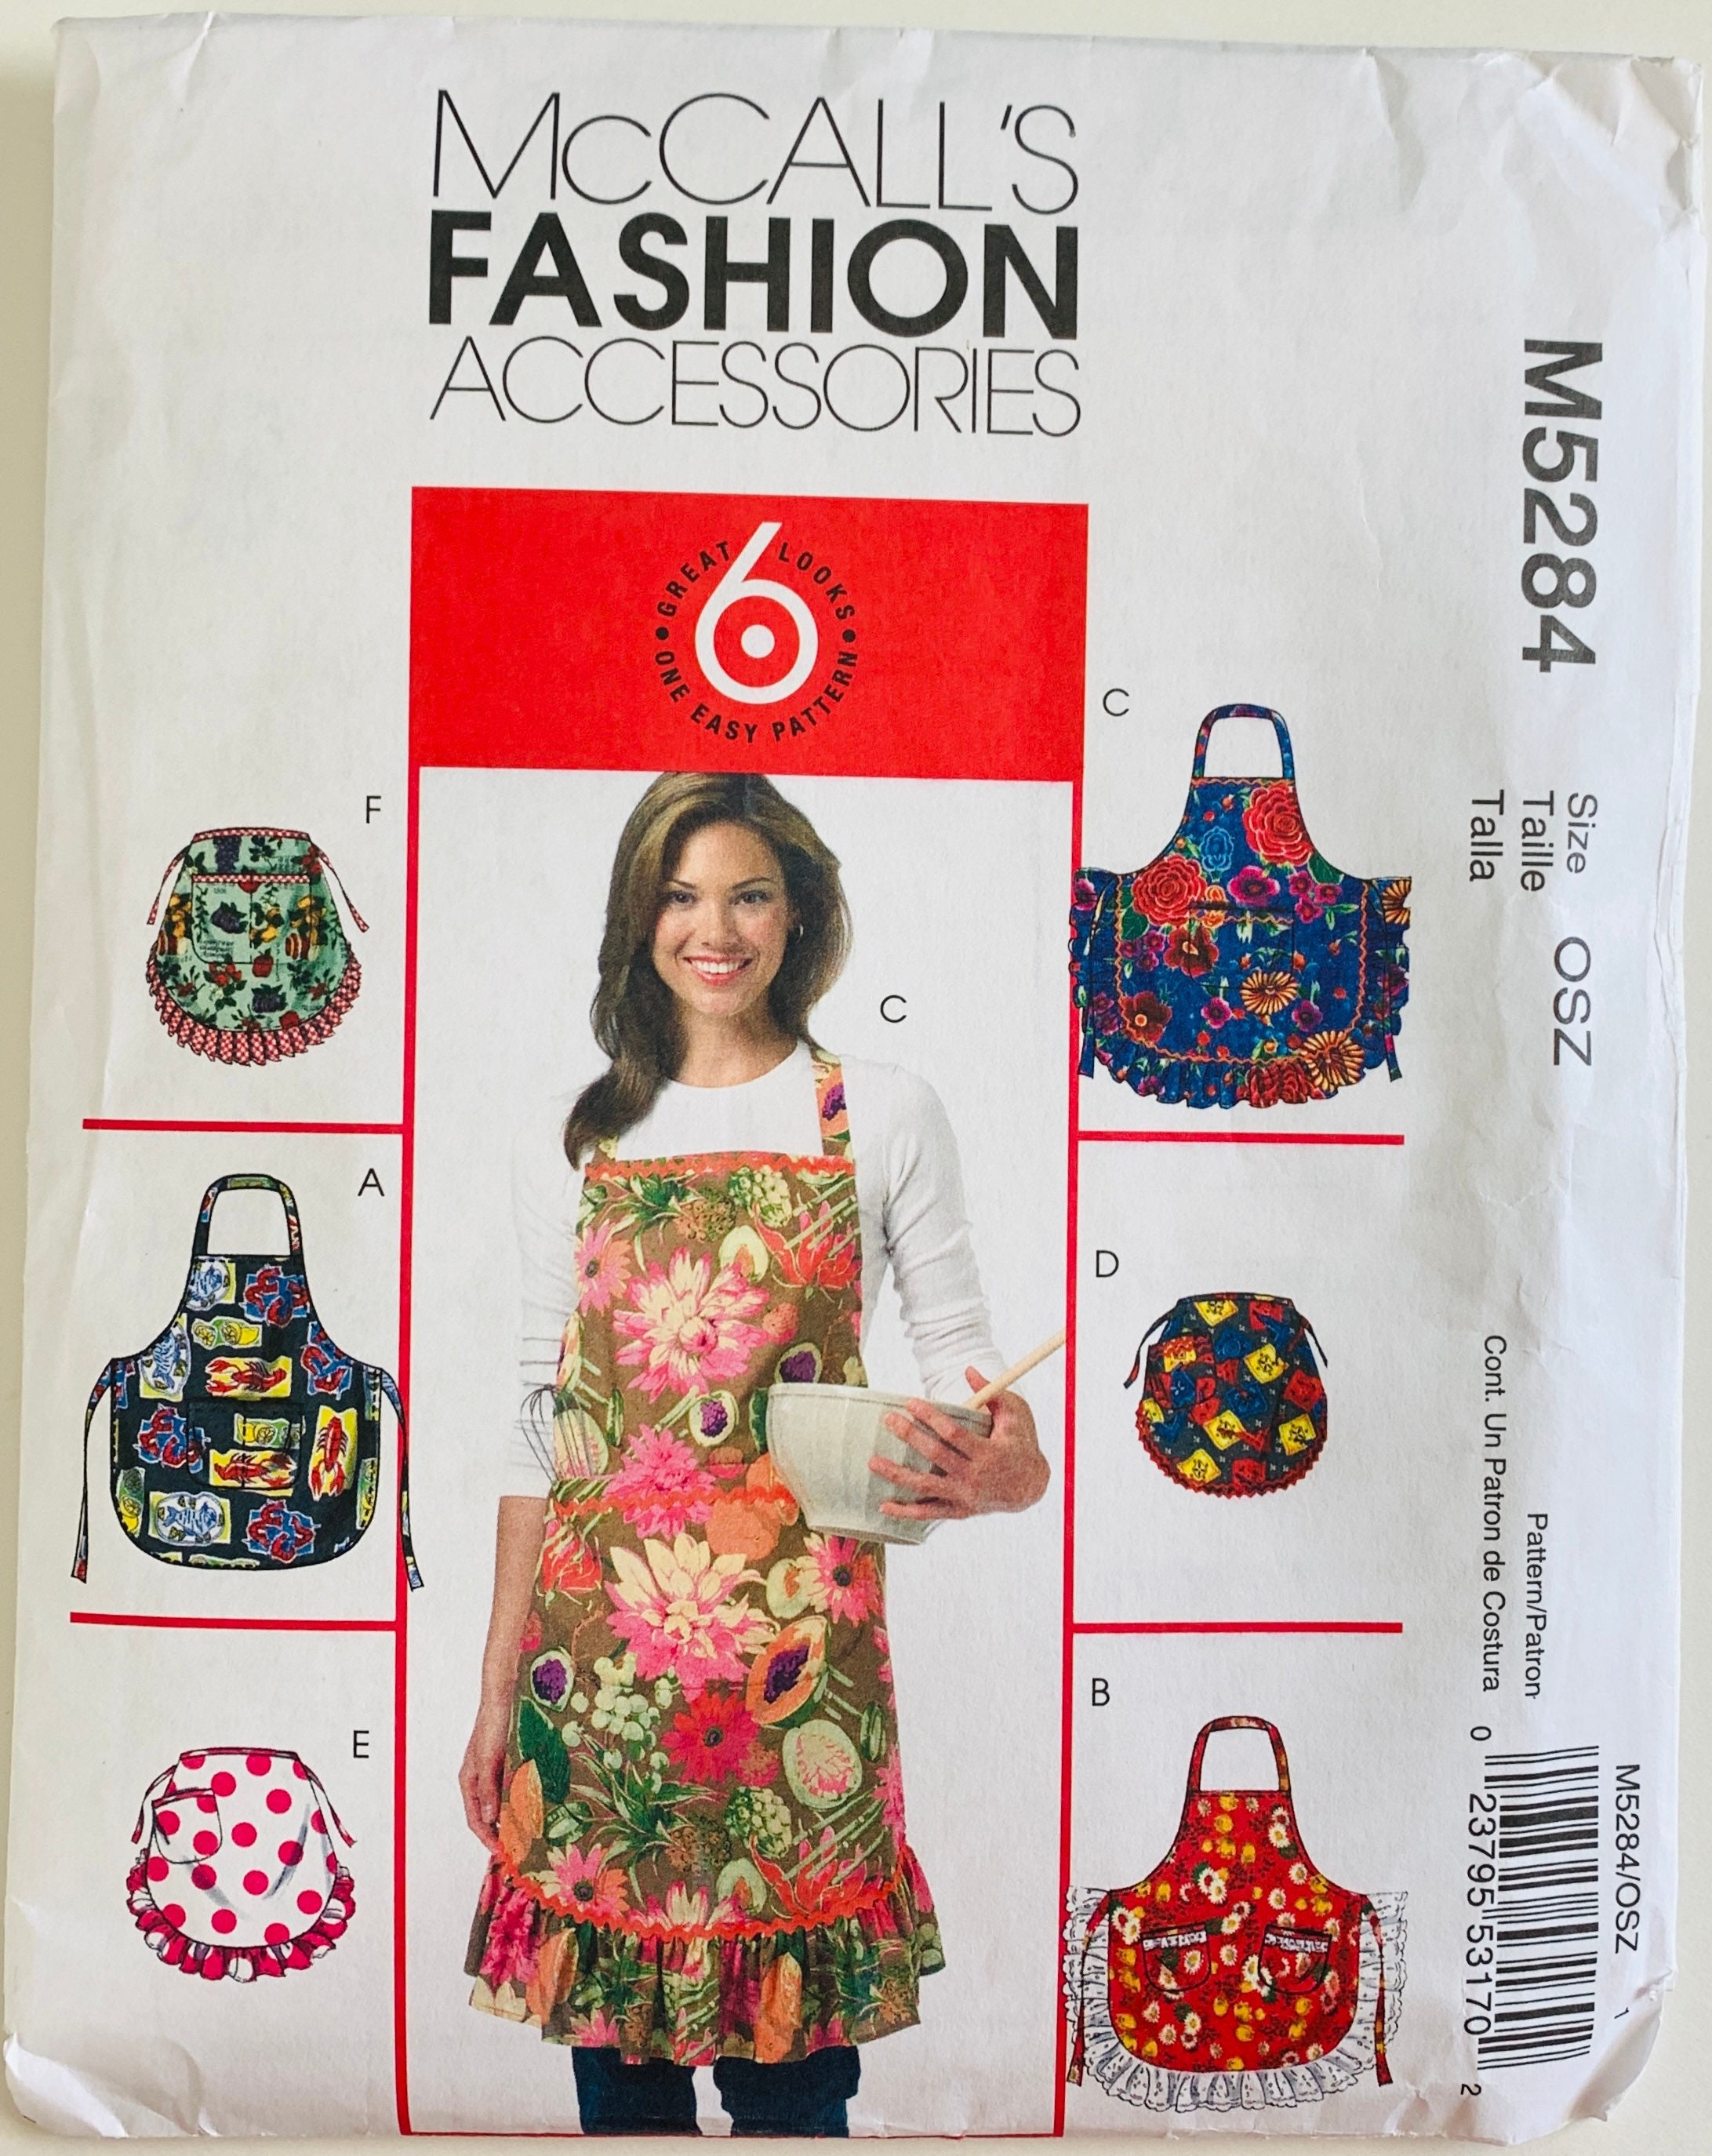 Easy Egg Collecting Apron for Farmers. Fast to Sew in a Weekend. Includes  Pattern Pieces 4 Apron. Cute Apron for Crafts or Gardening. 